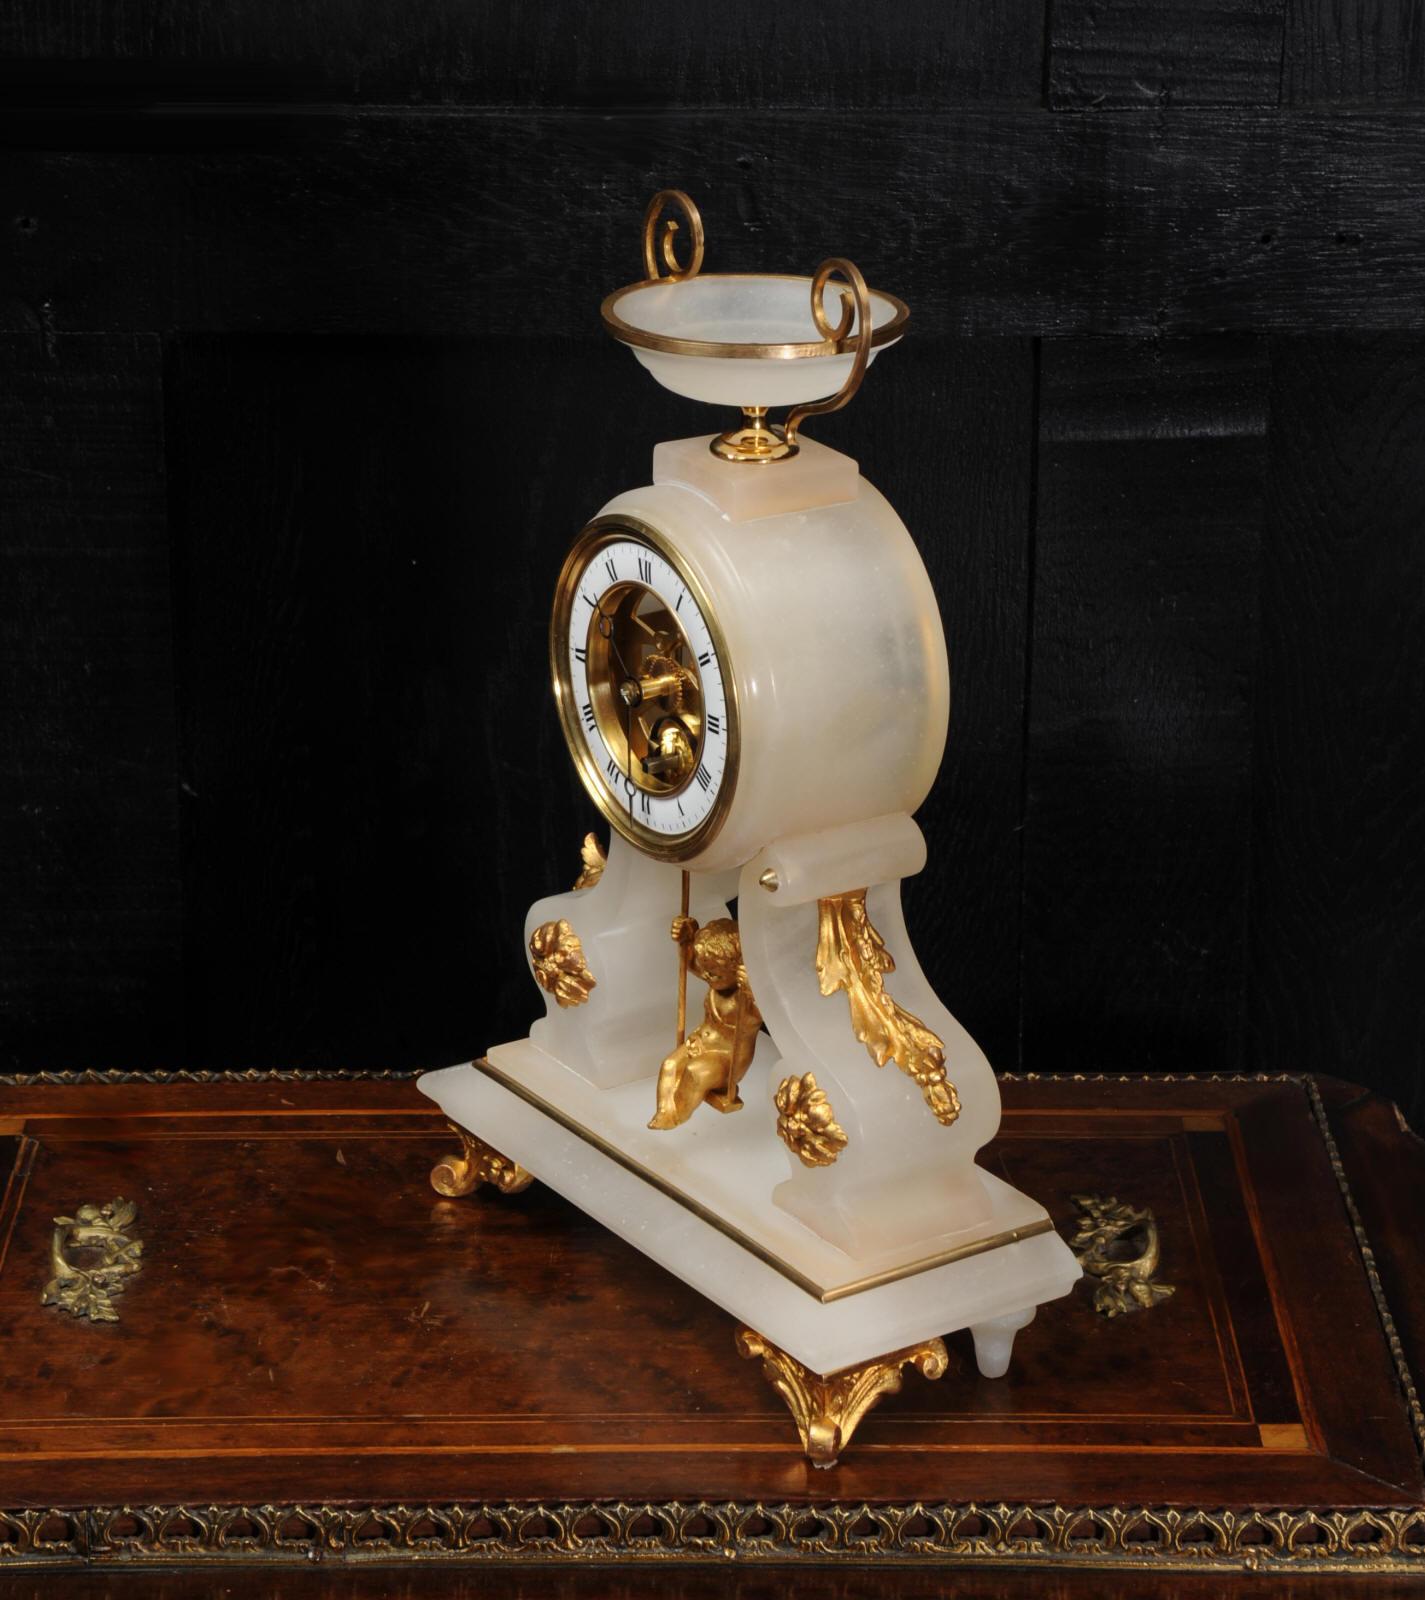 19th Century Rare Cherub on a Swing Antique French Boudoir Clock with Visible Escapement